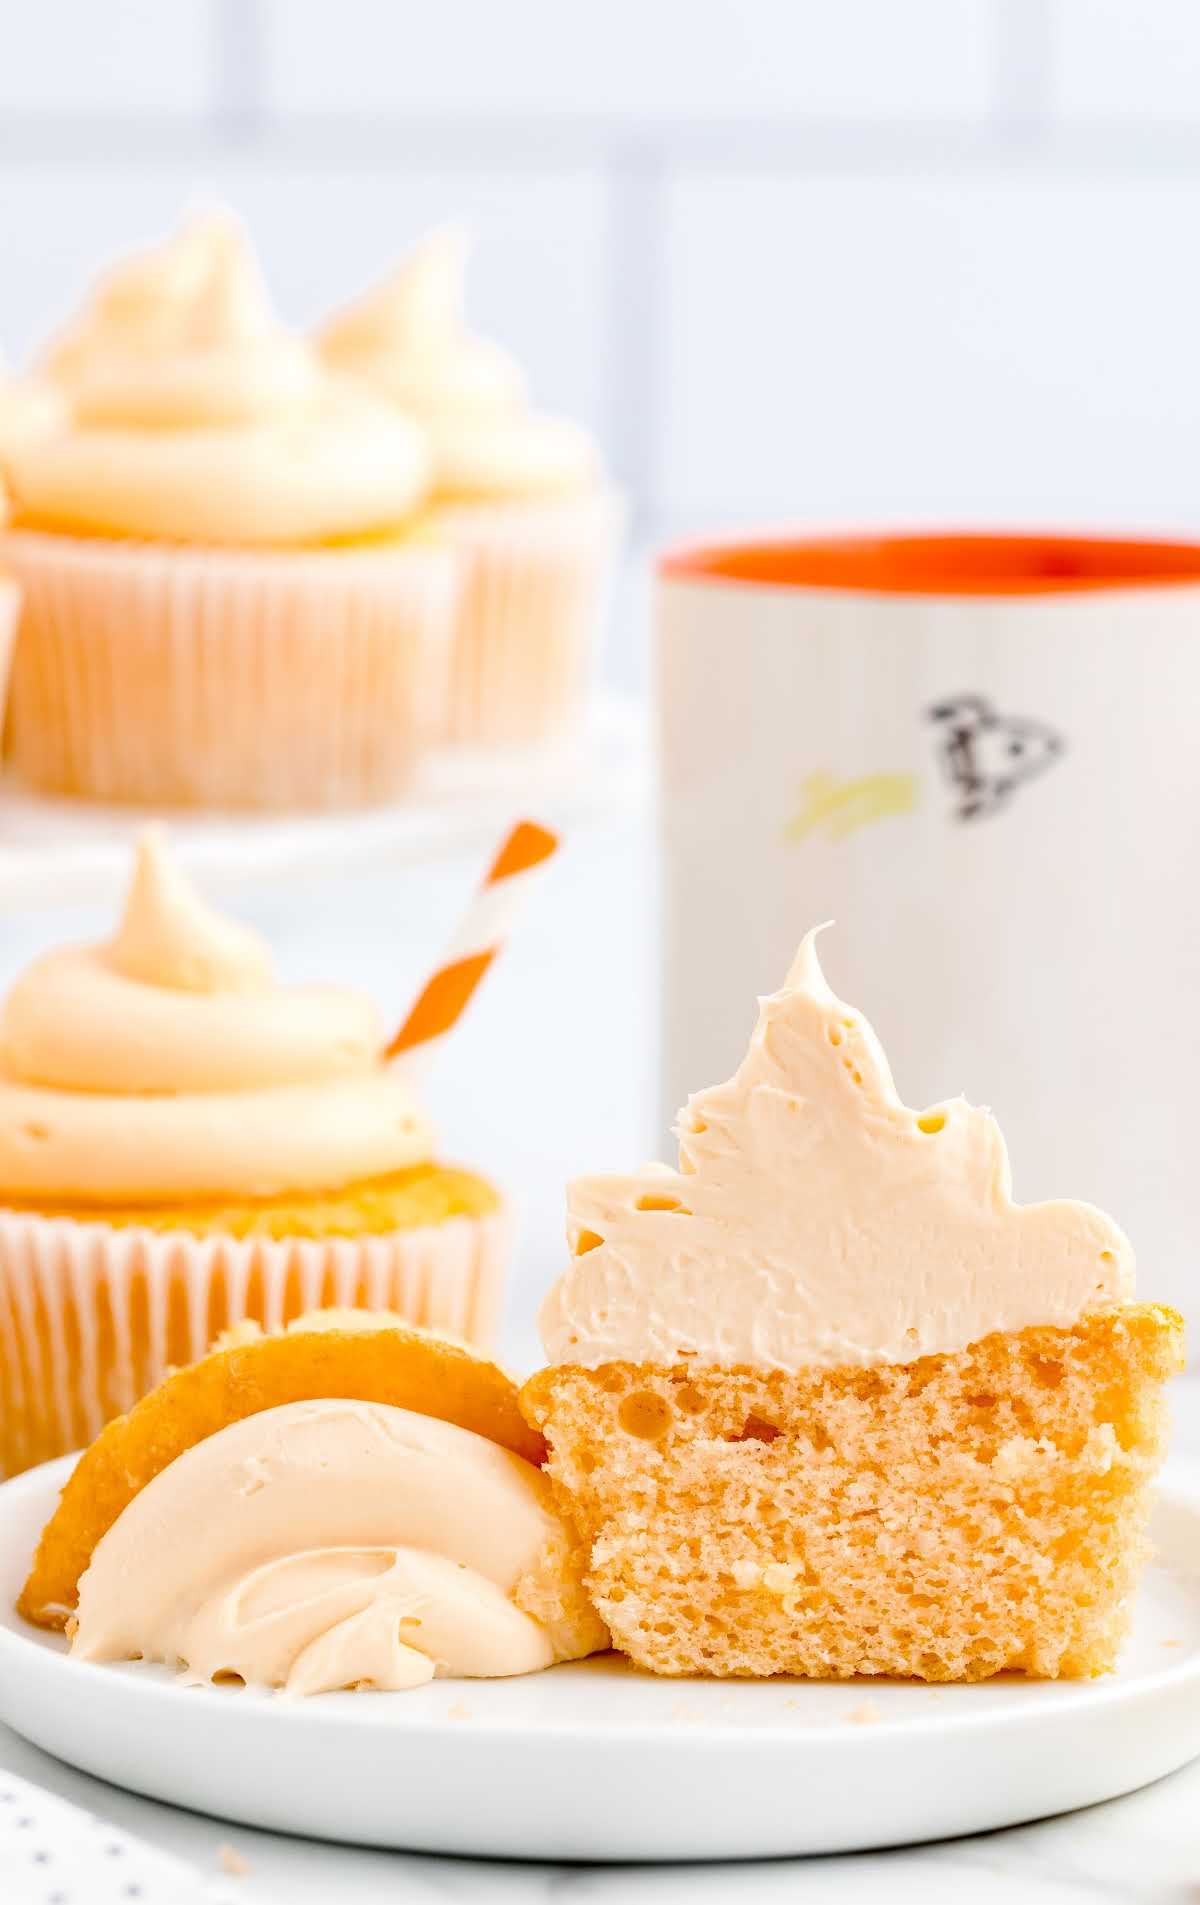 A close up of a slice of cake on a plate, with Cupcake and Orange